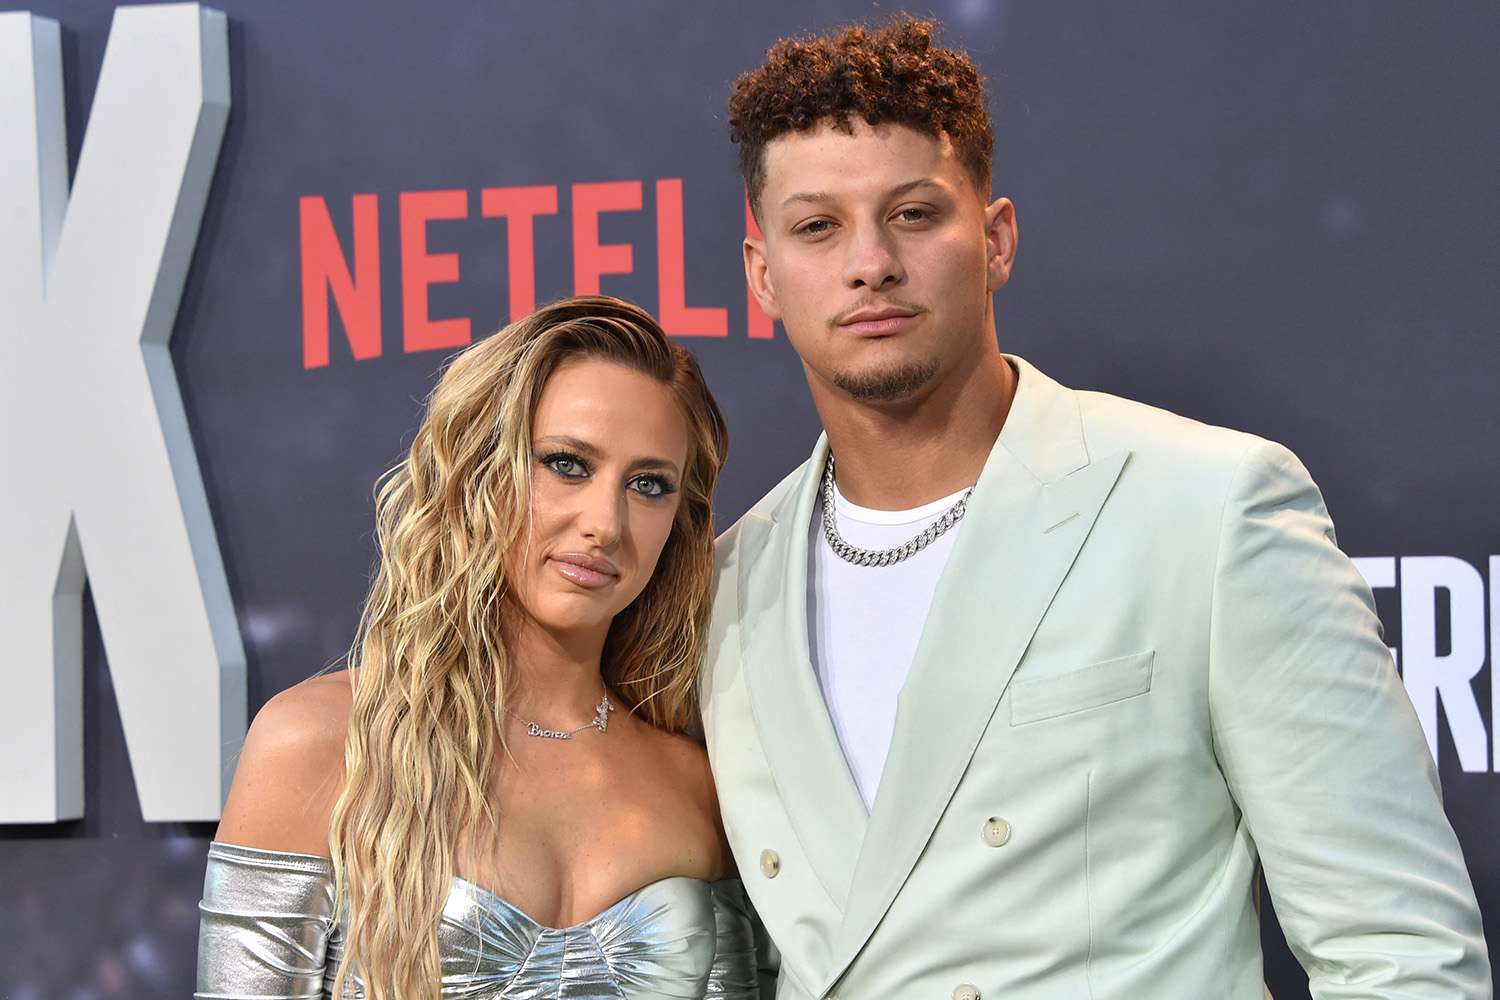 Hard to believe ' Patrick Mahomes and wife Brittany are ‘going their own separate ways’ secret text reveled 